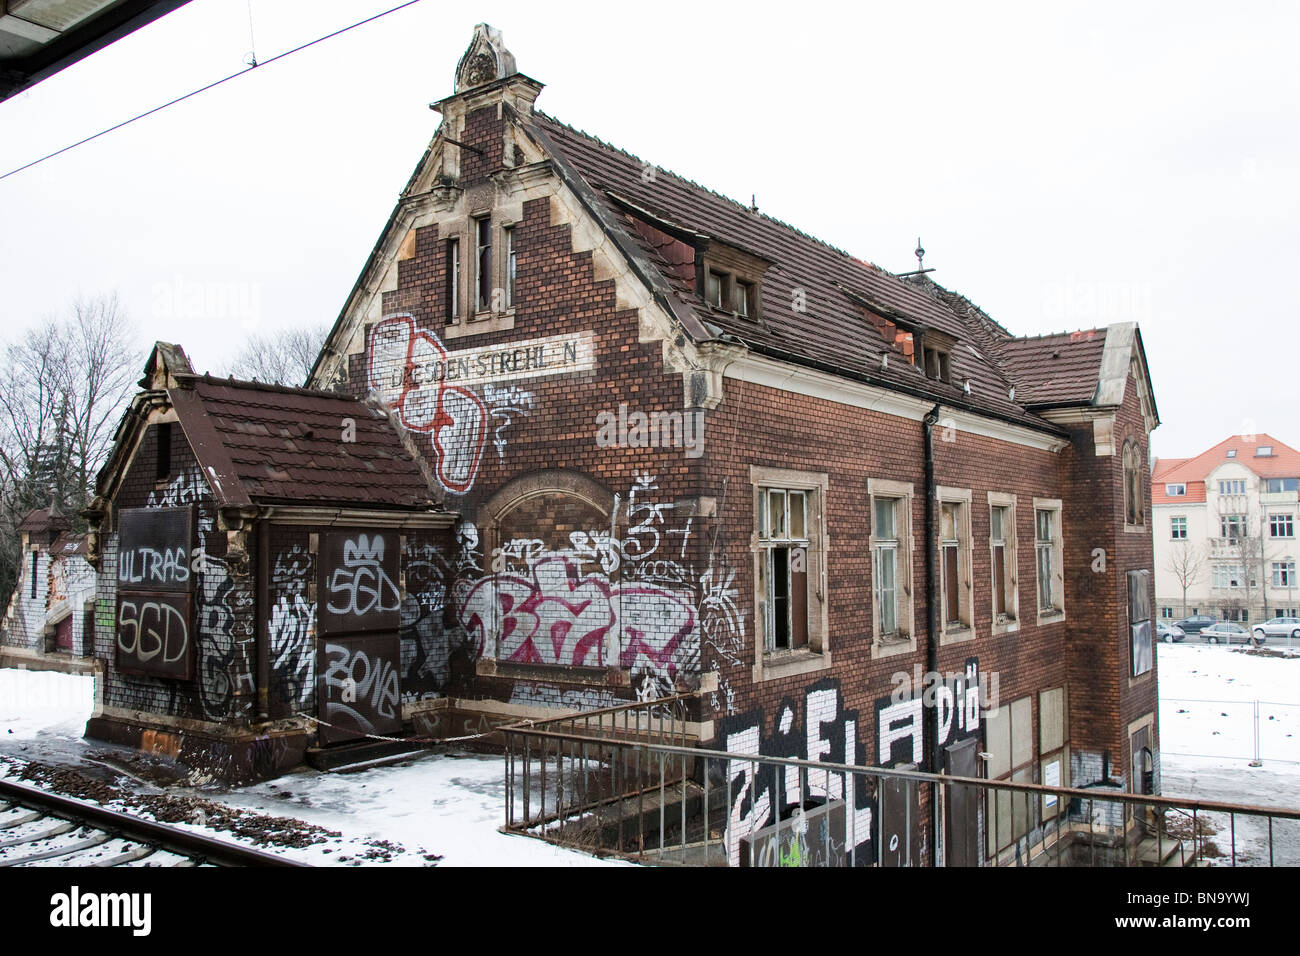 The old railway station at Strehlen, Dresden, Germany. Stock Photo